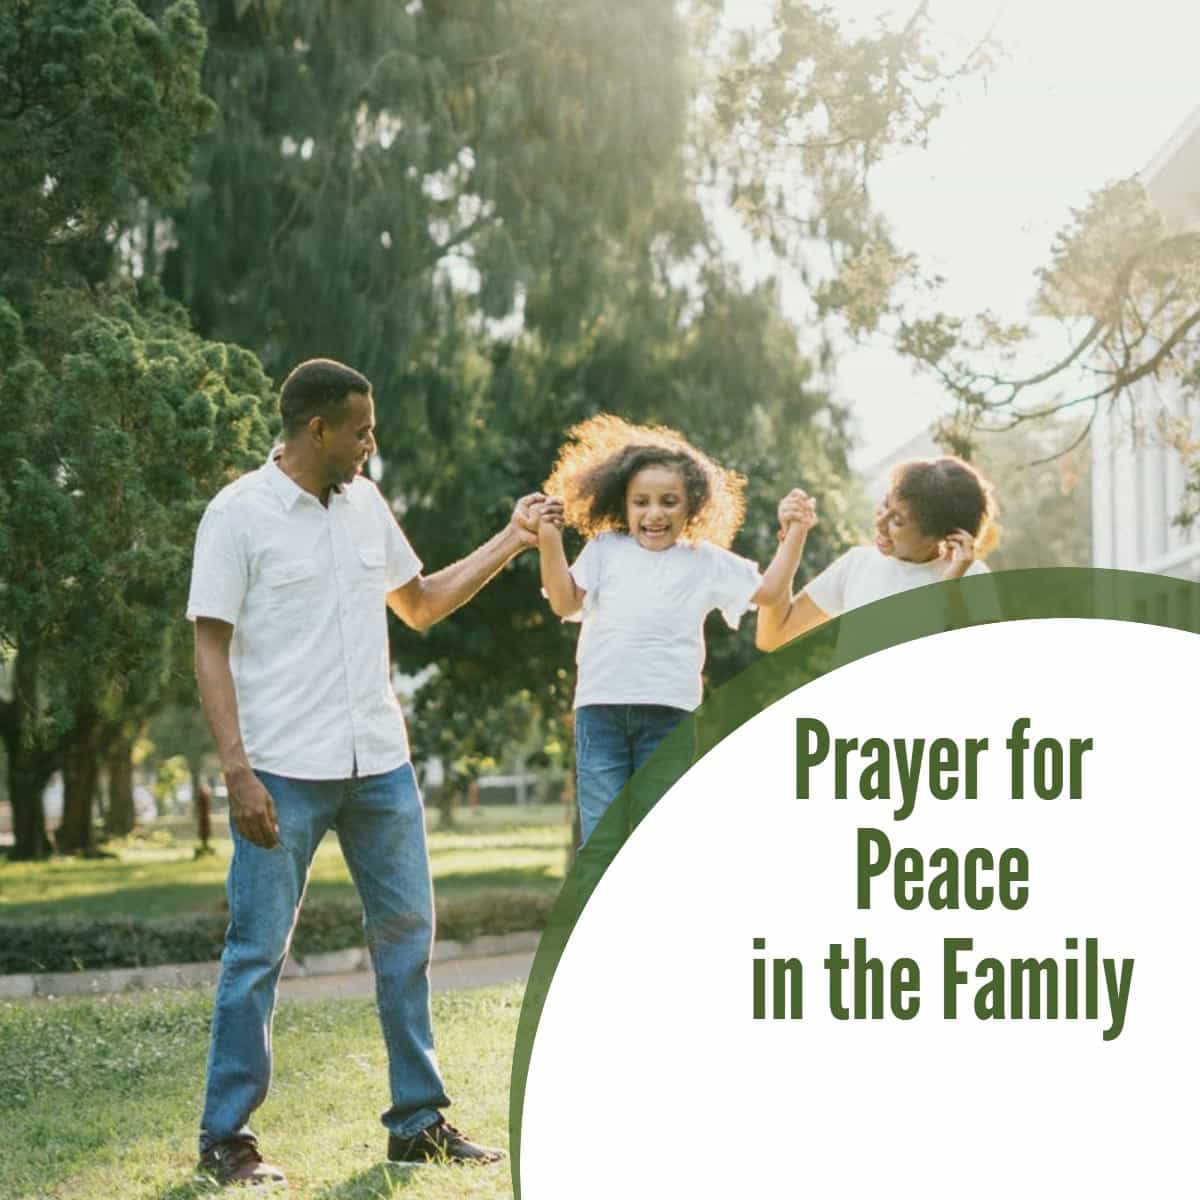 Prayer for Peace in the Family